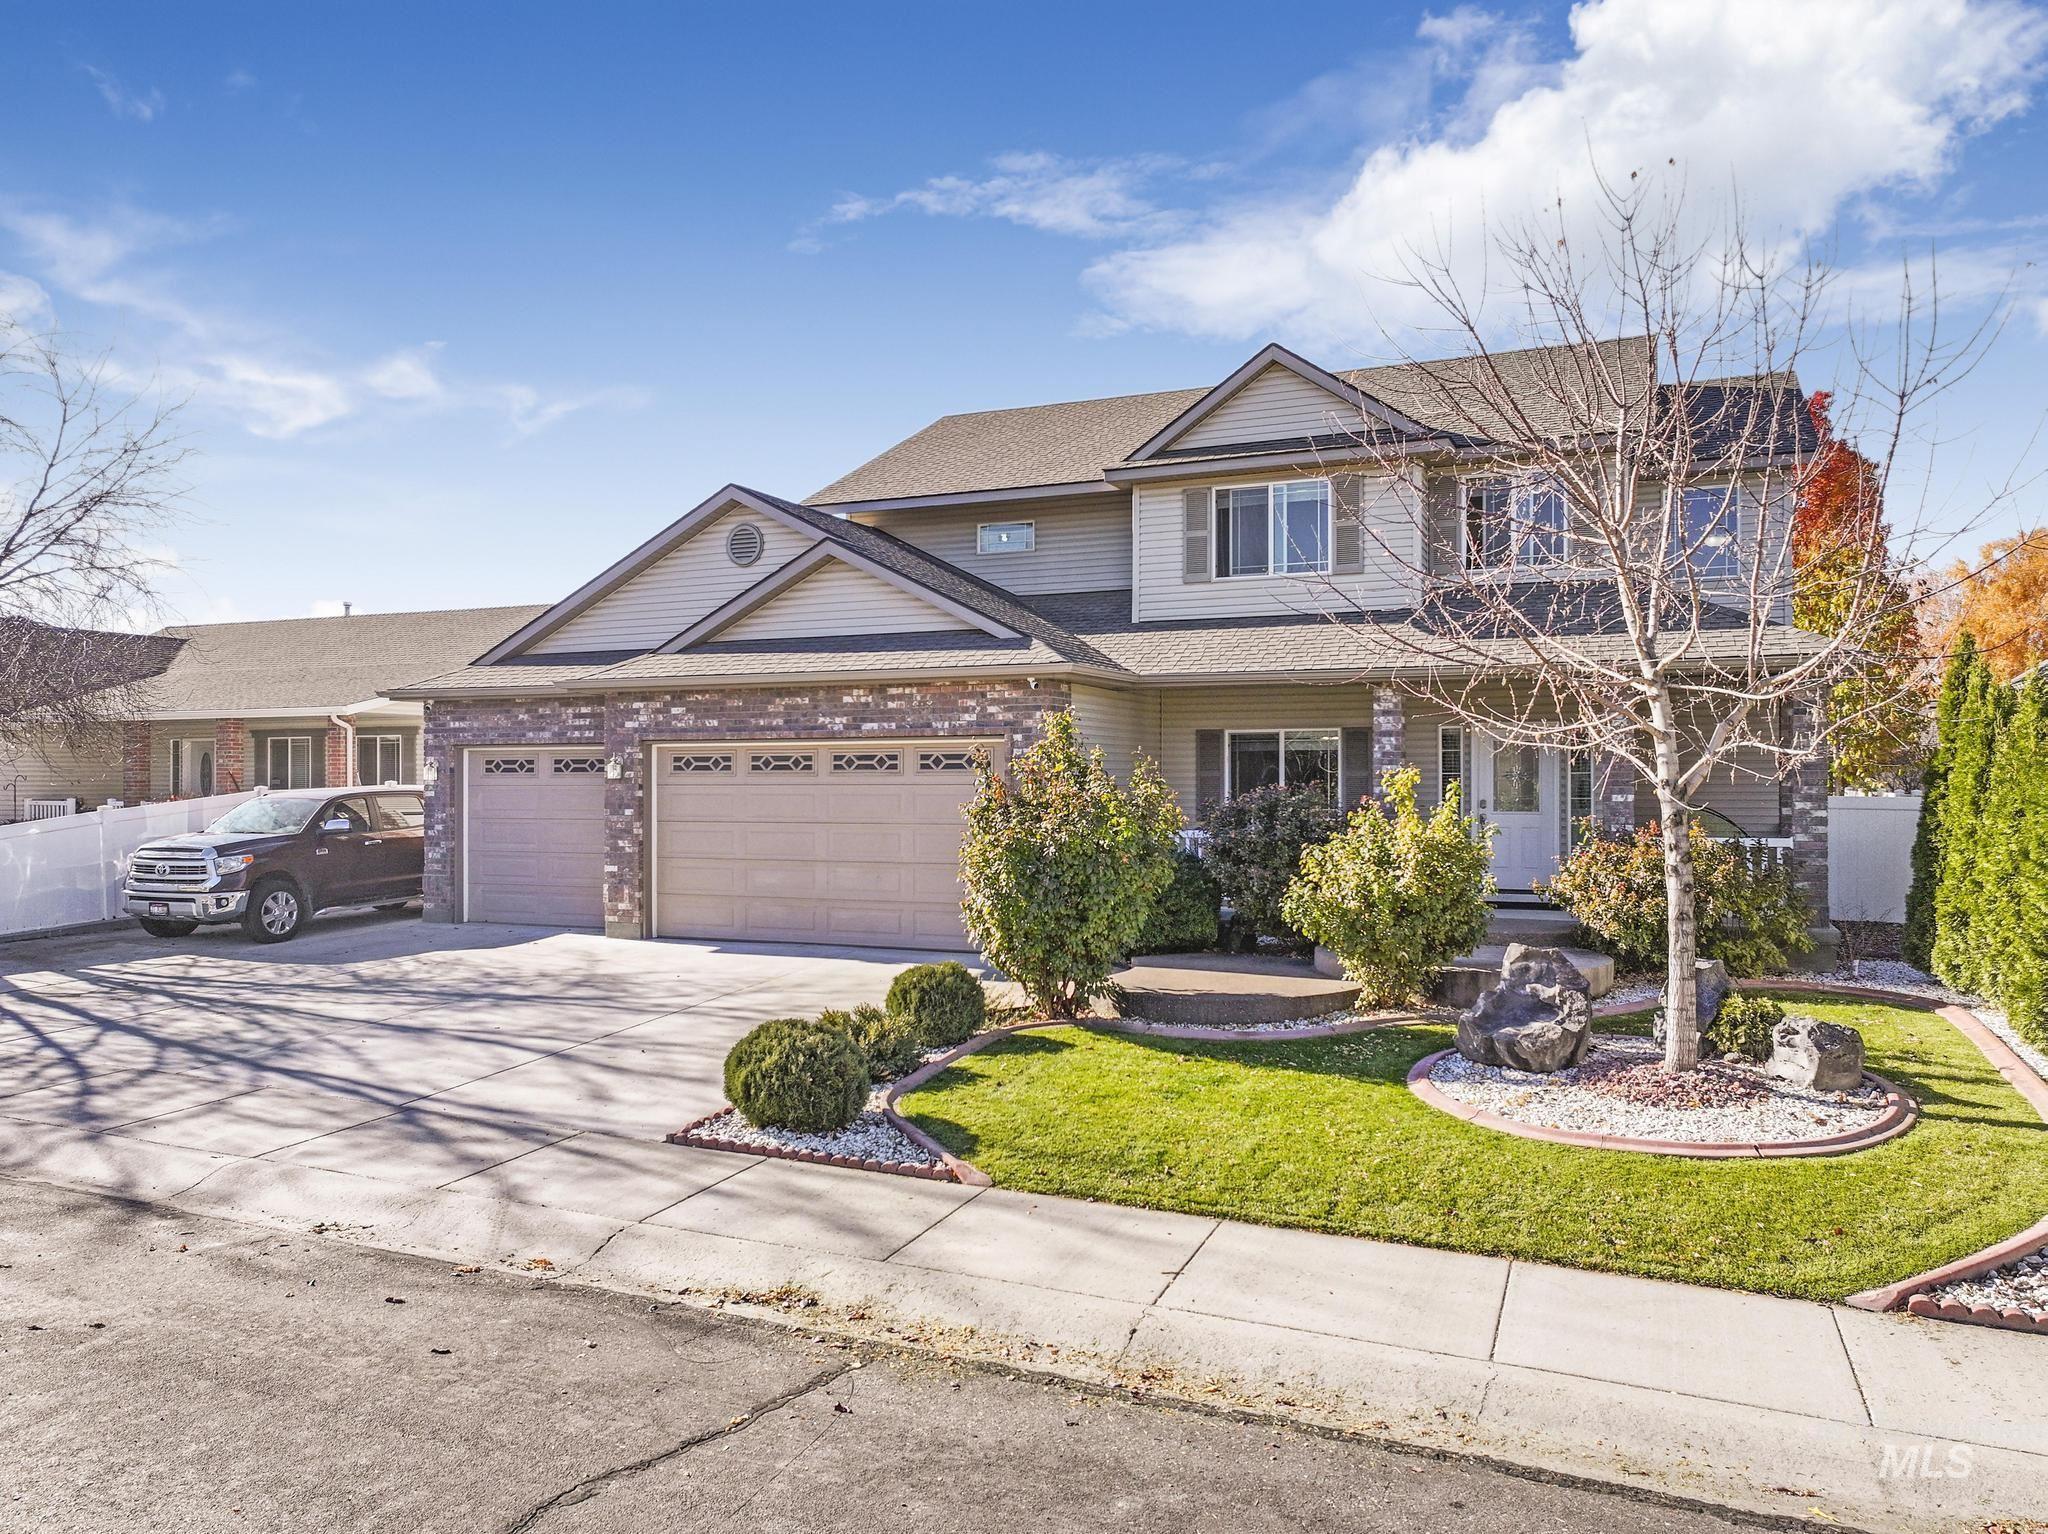 631 Sunbeam Dr., Twin Falls, Idaho 83301, 5 Bedrooms, 3.5 Bathrooms, Residential For Sale, Price $620,000,MLS 98895243